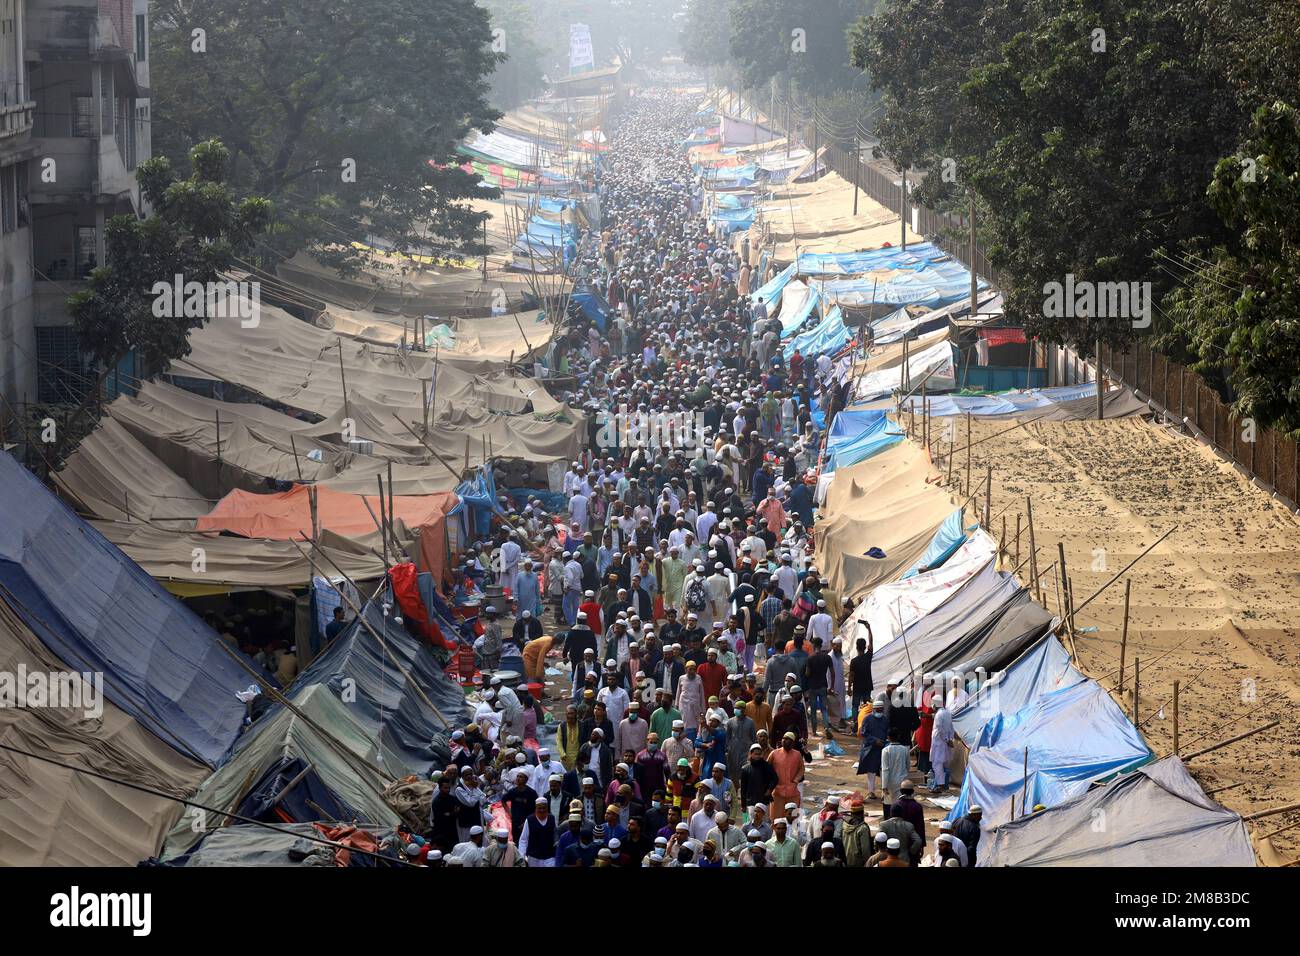 Tongi, Gazipur, Bangladesh. 13th Jan, 2023. The Bishwa (World) Ijtema is the second largest annual Muslim congregation in the world after the Hajj